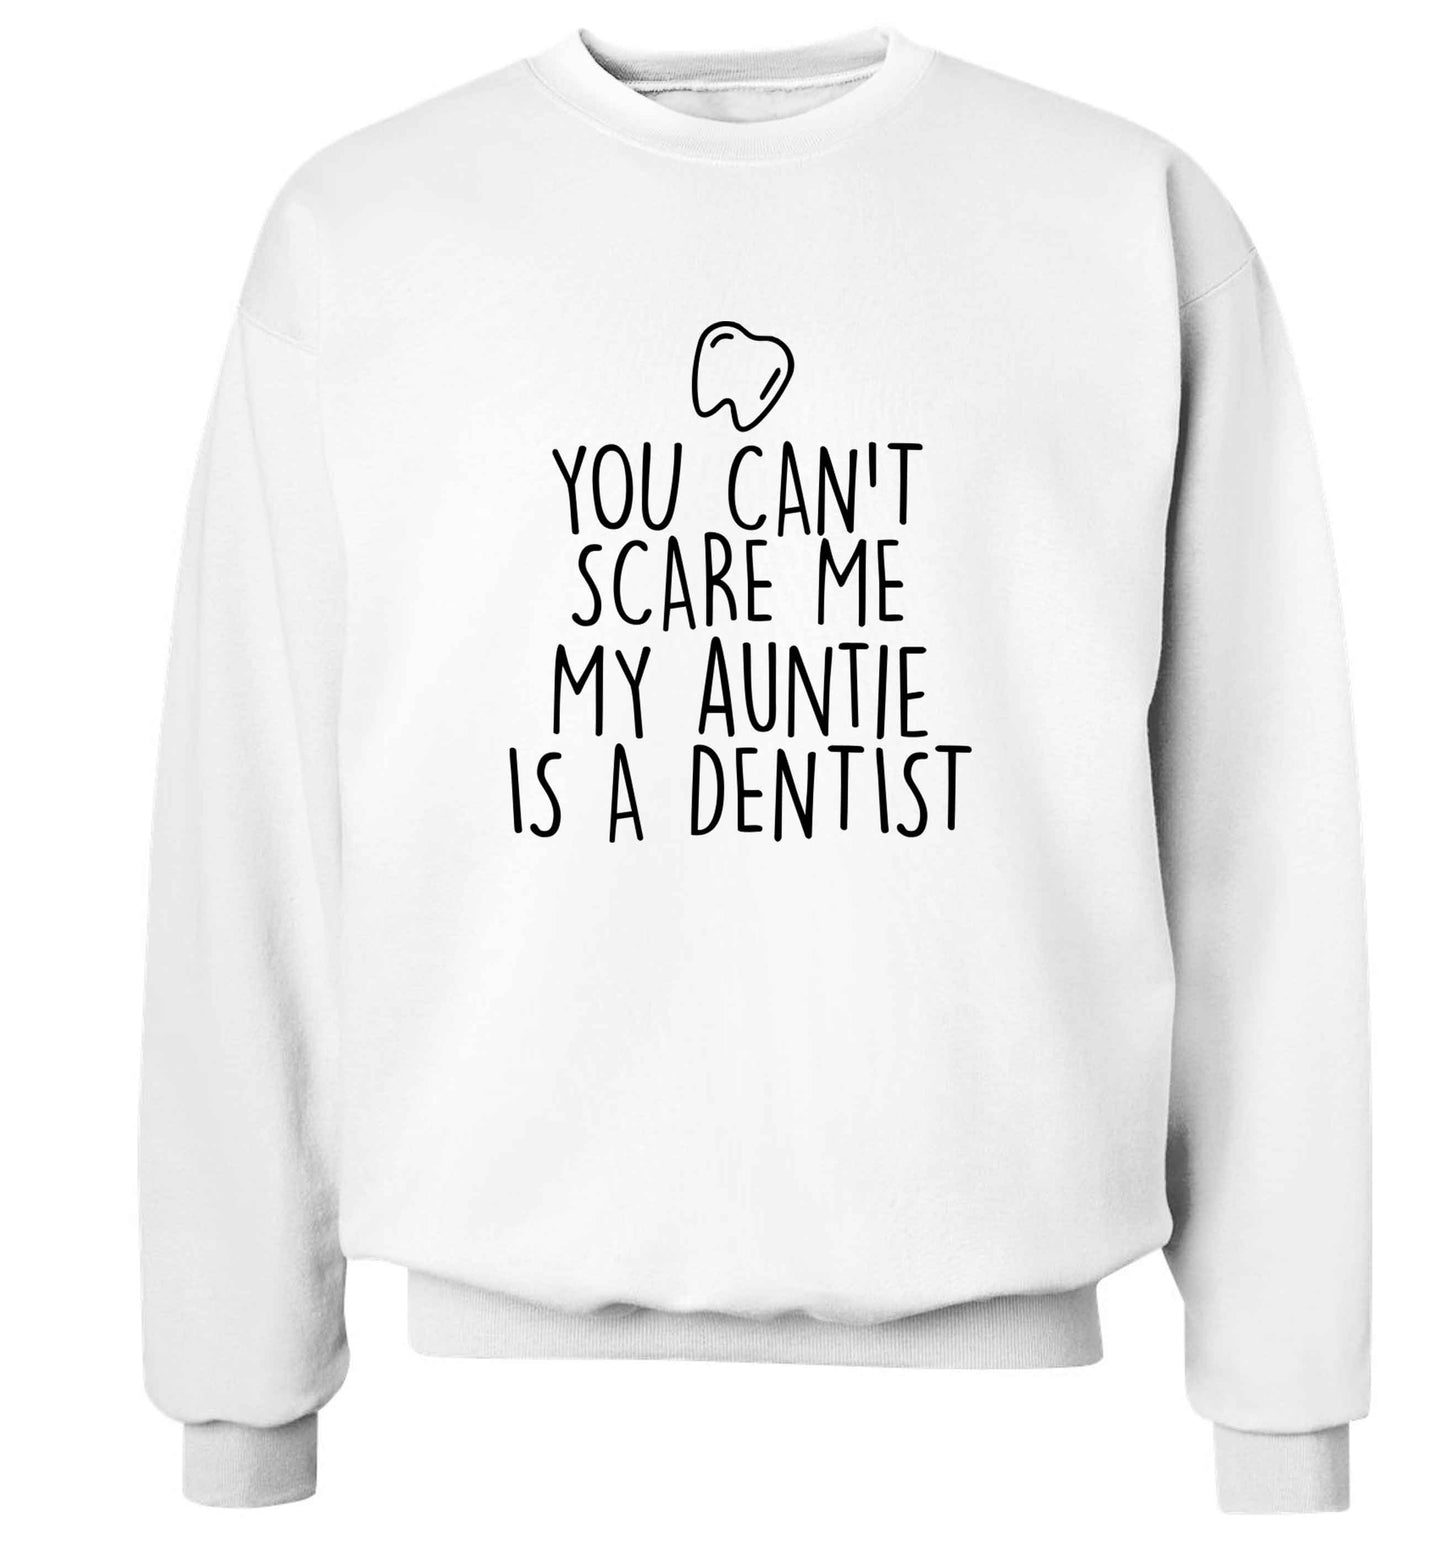 You can't scare me my auntie is a dentist adult's unisex white sweater 2XL